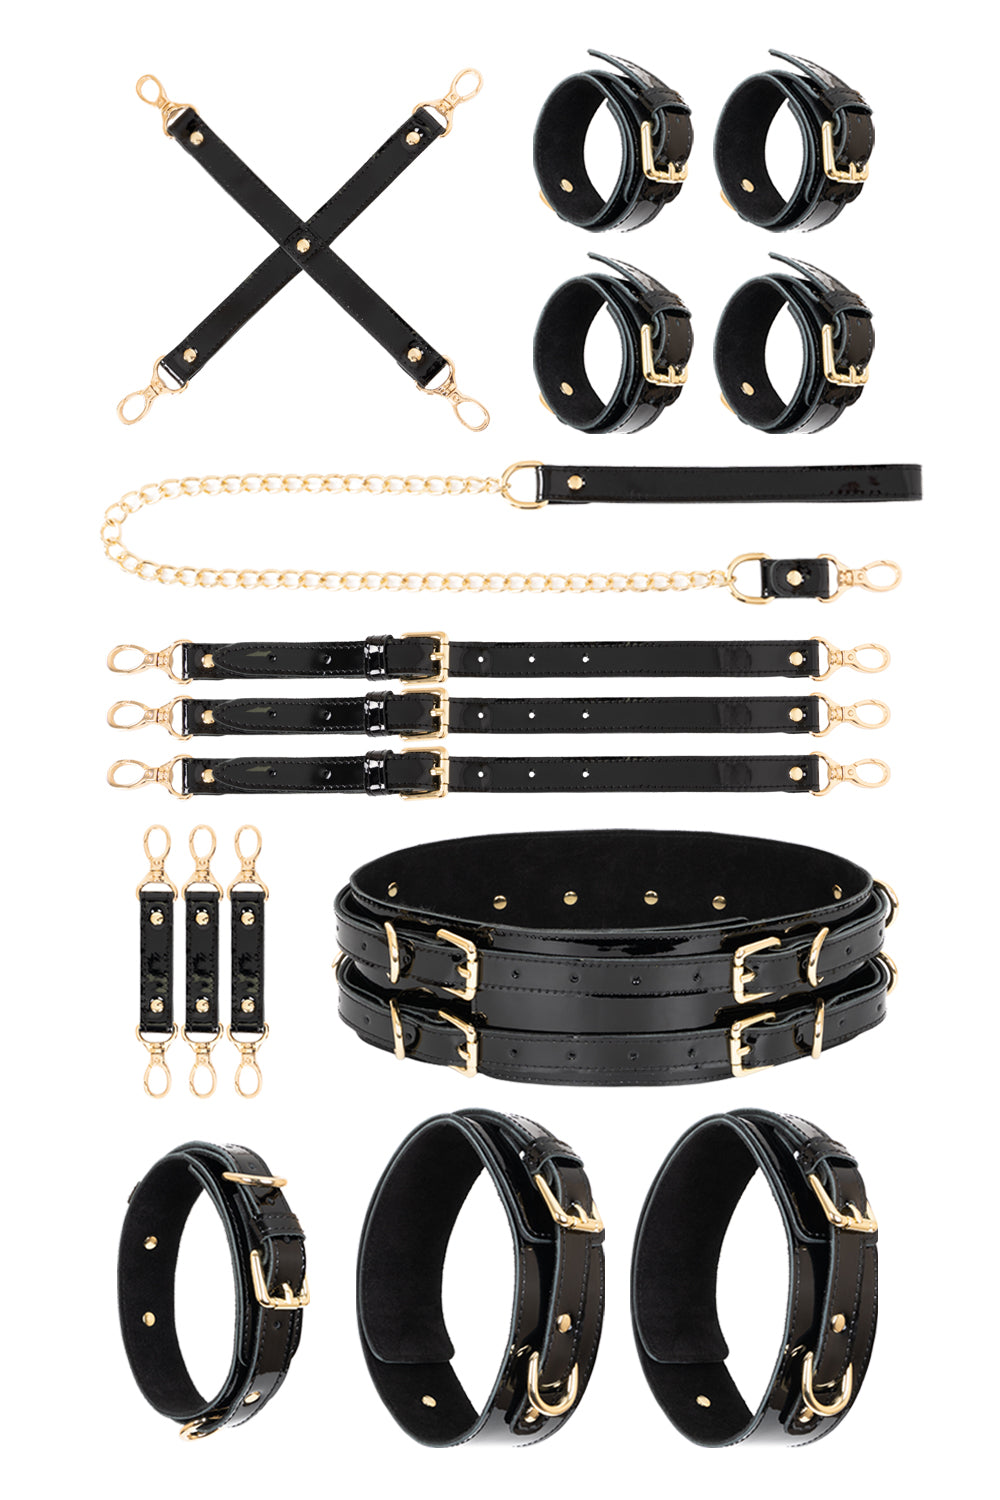 Lacquered leather FULL Set with chain leash. Black